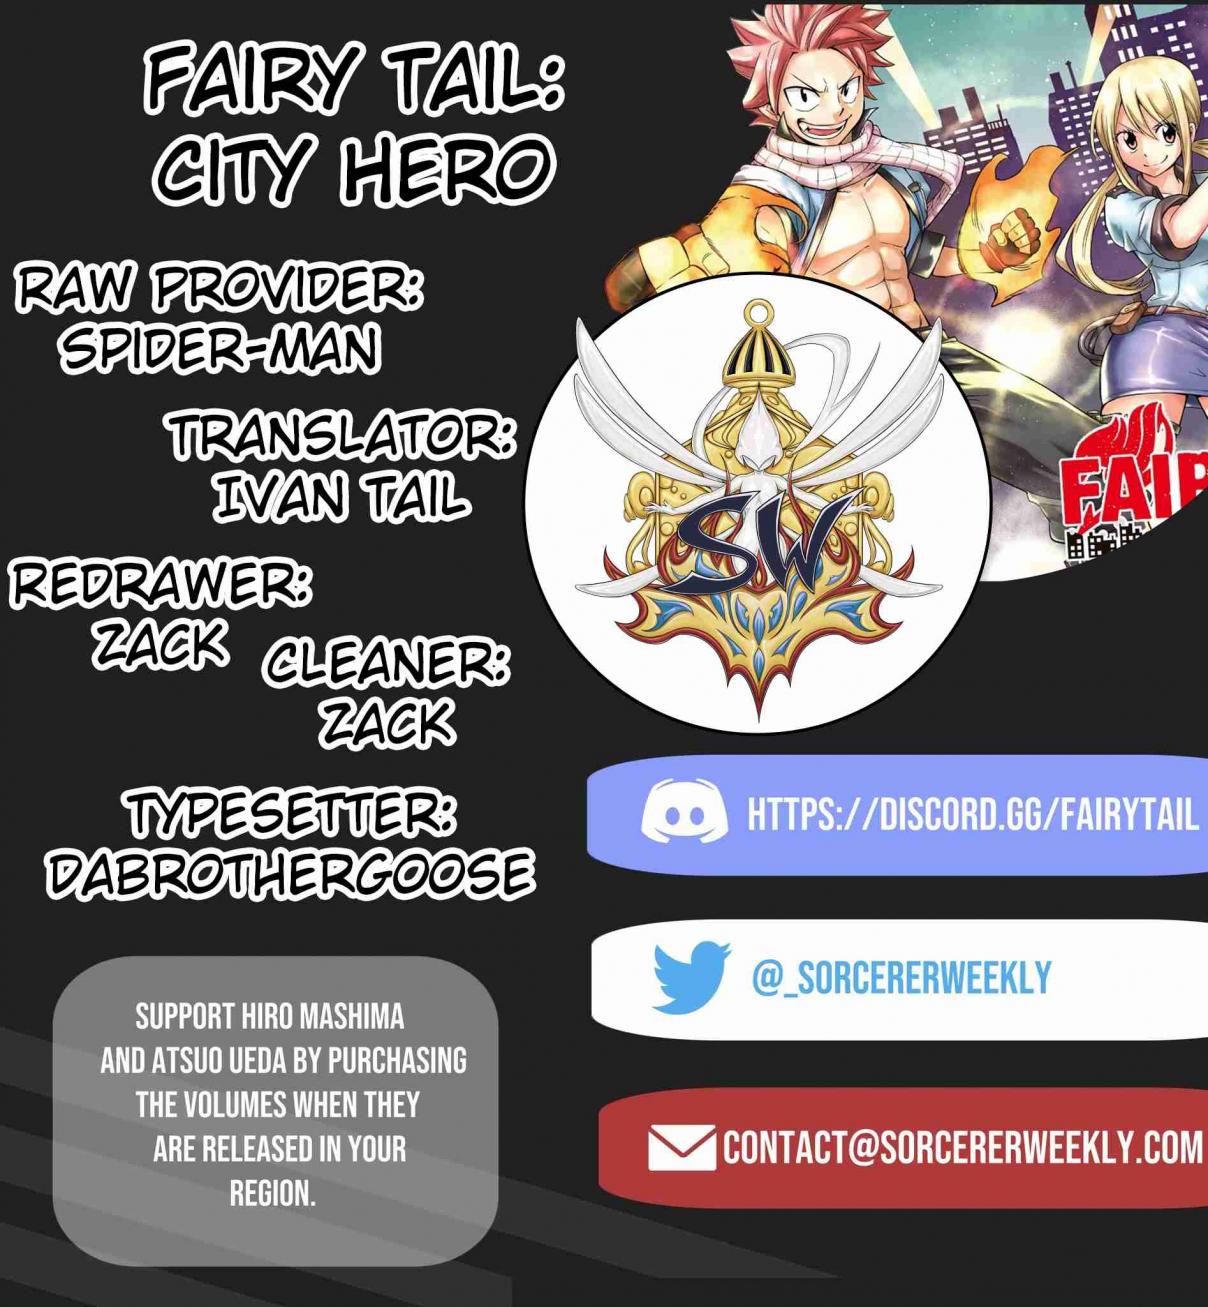 Fairy Tail: City Hero Ch. 39 Always Together